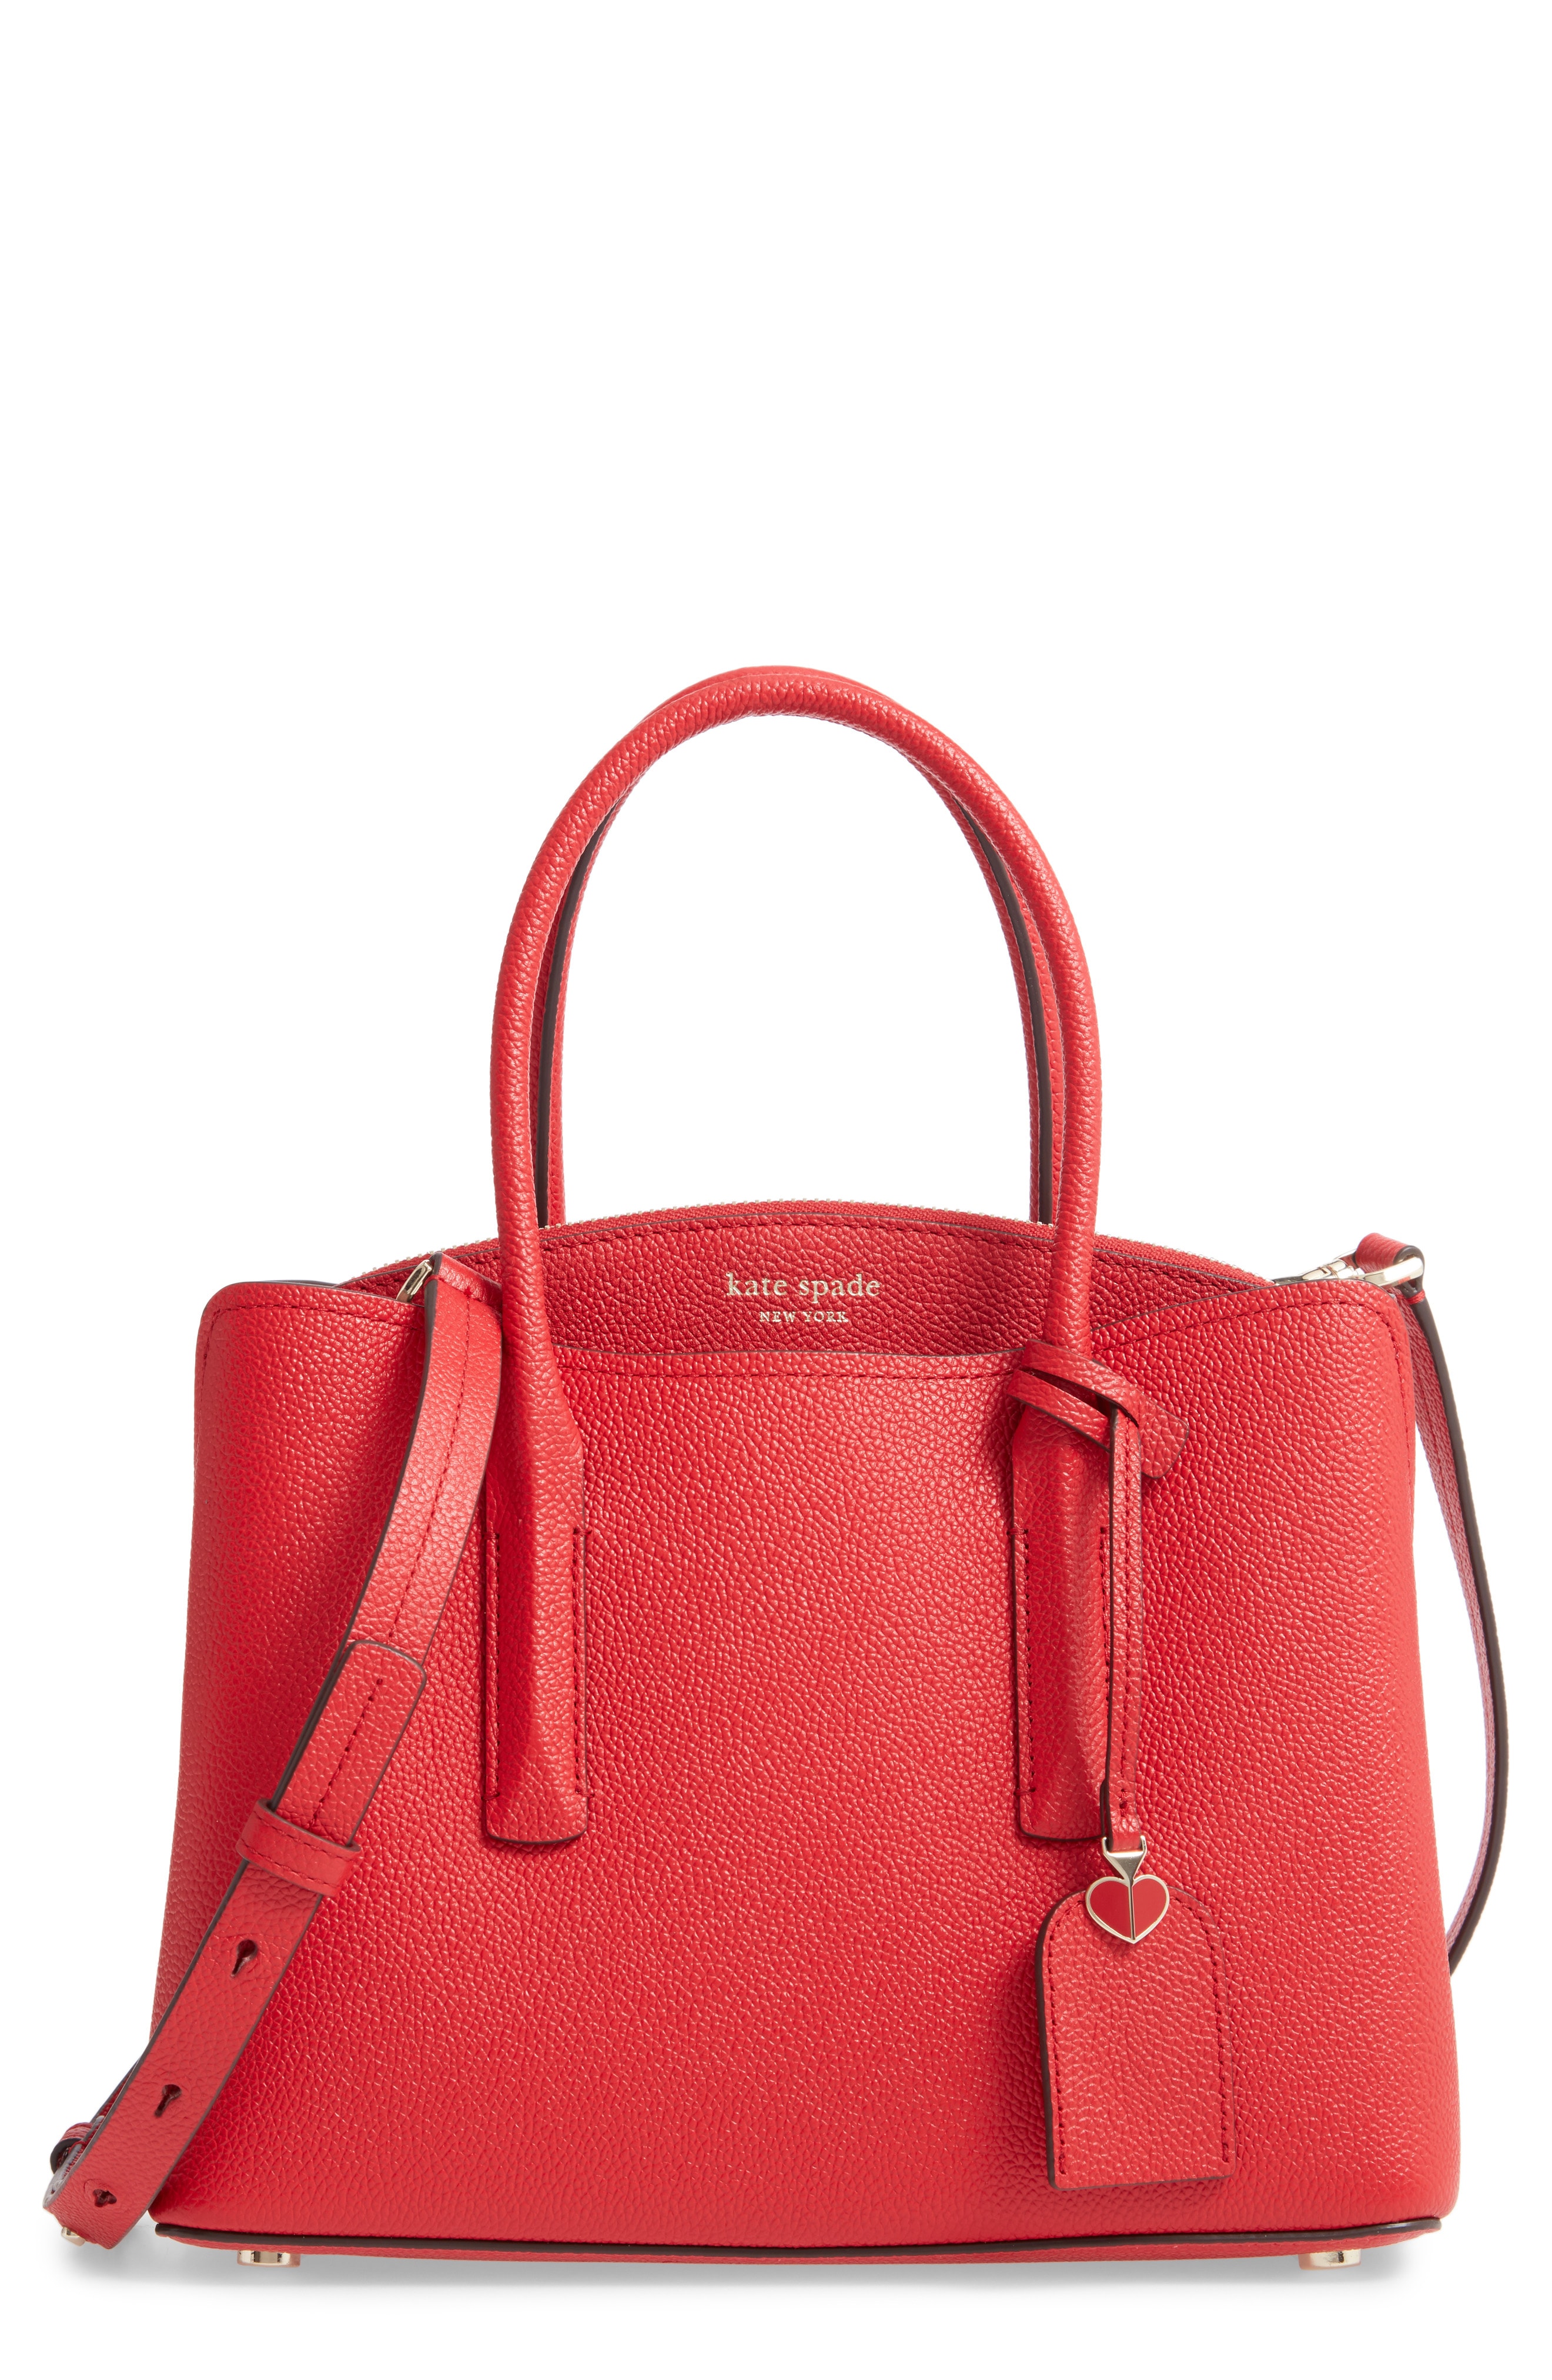 Red bag: eye-catcher for modern outfits